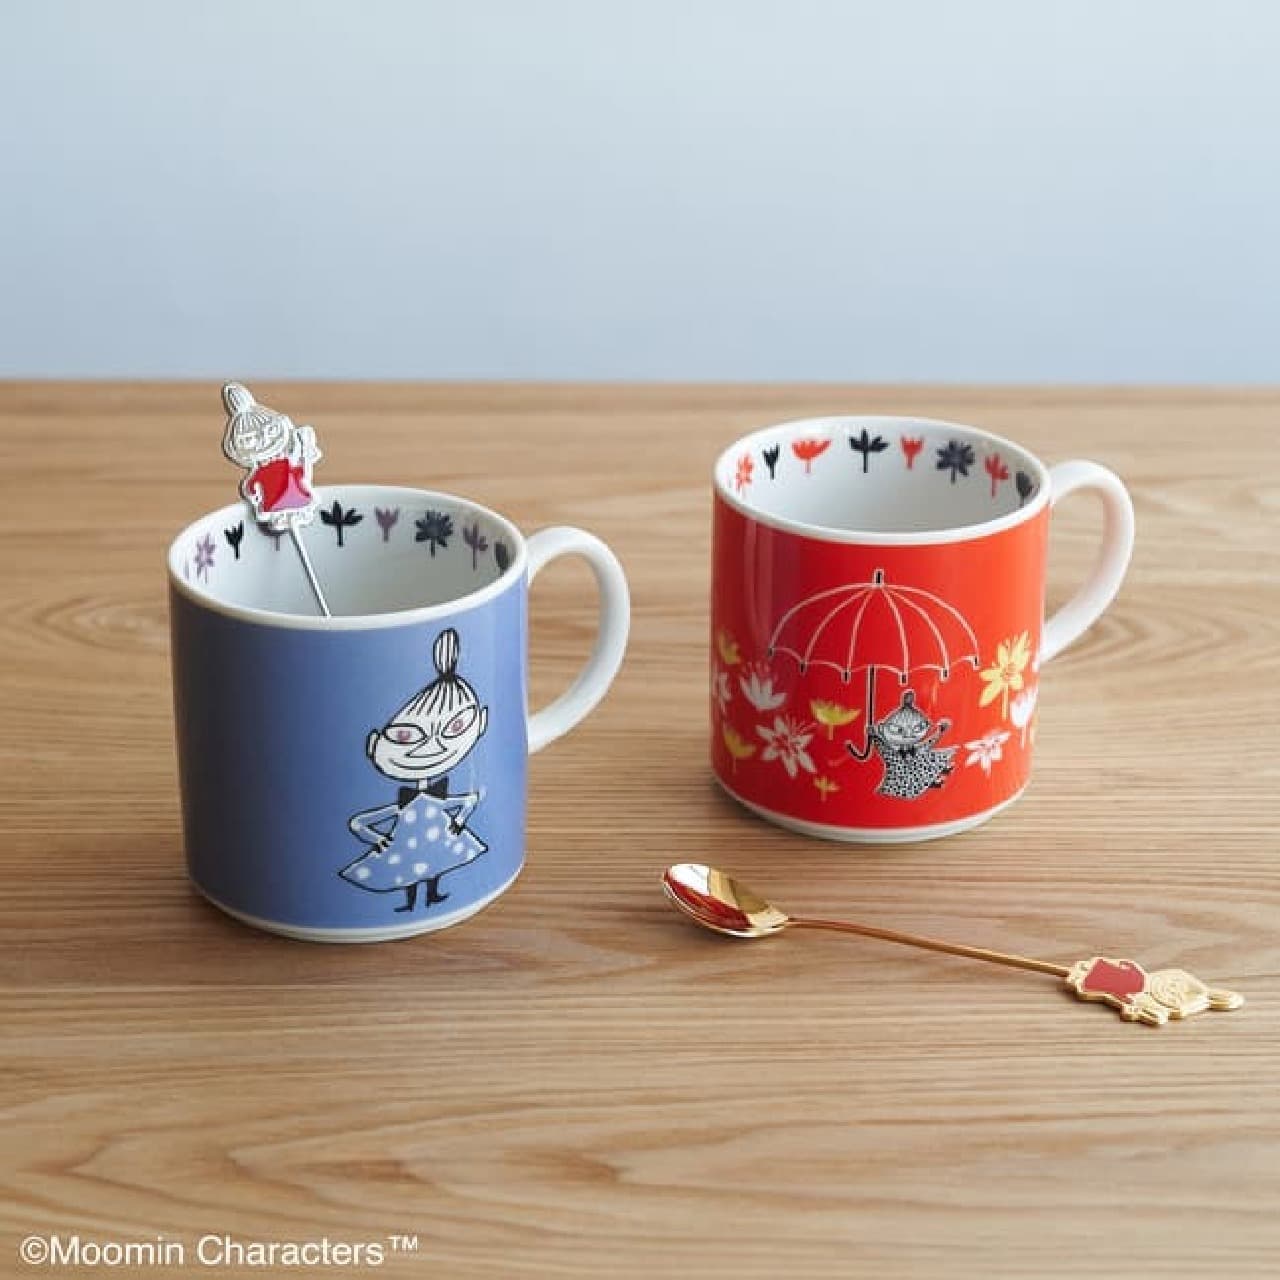 Afternoon Tea LIVING x Moomin collaboration --Little My Mimura Nee's kitchen and interior goods